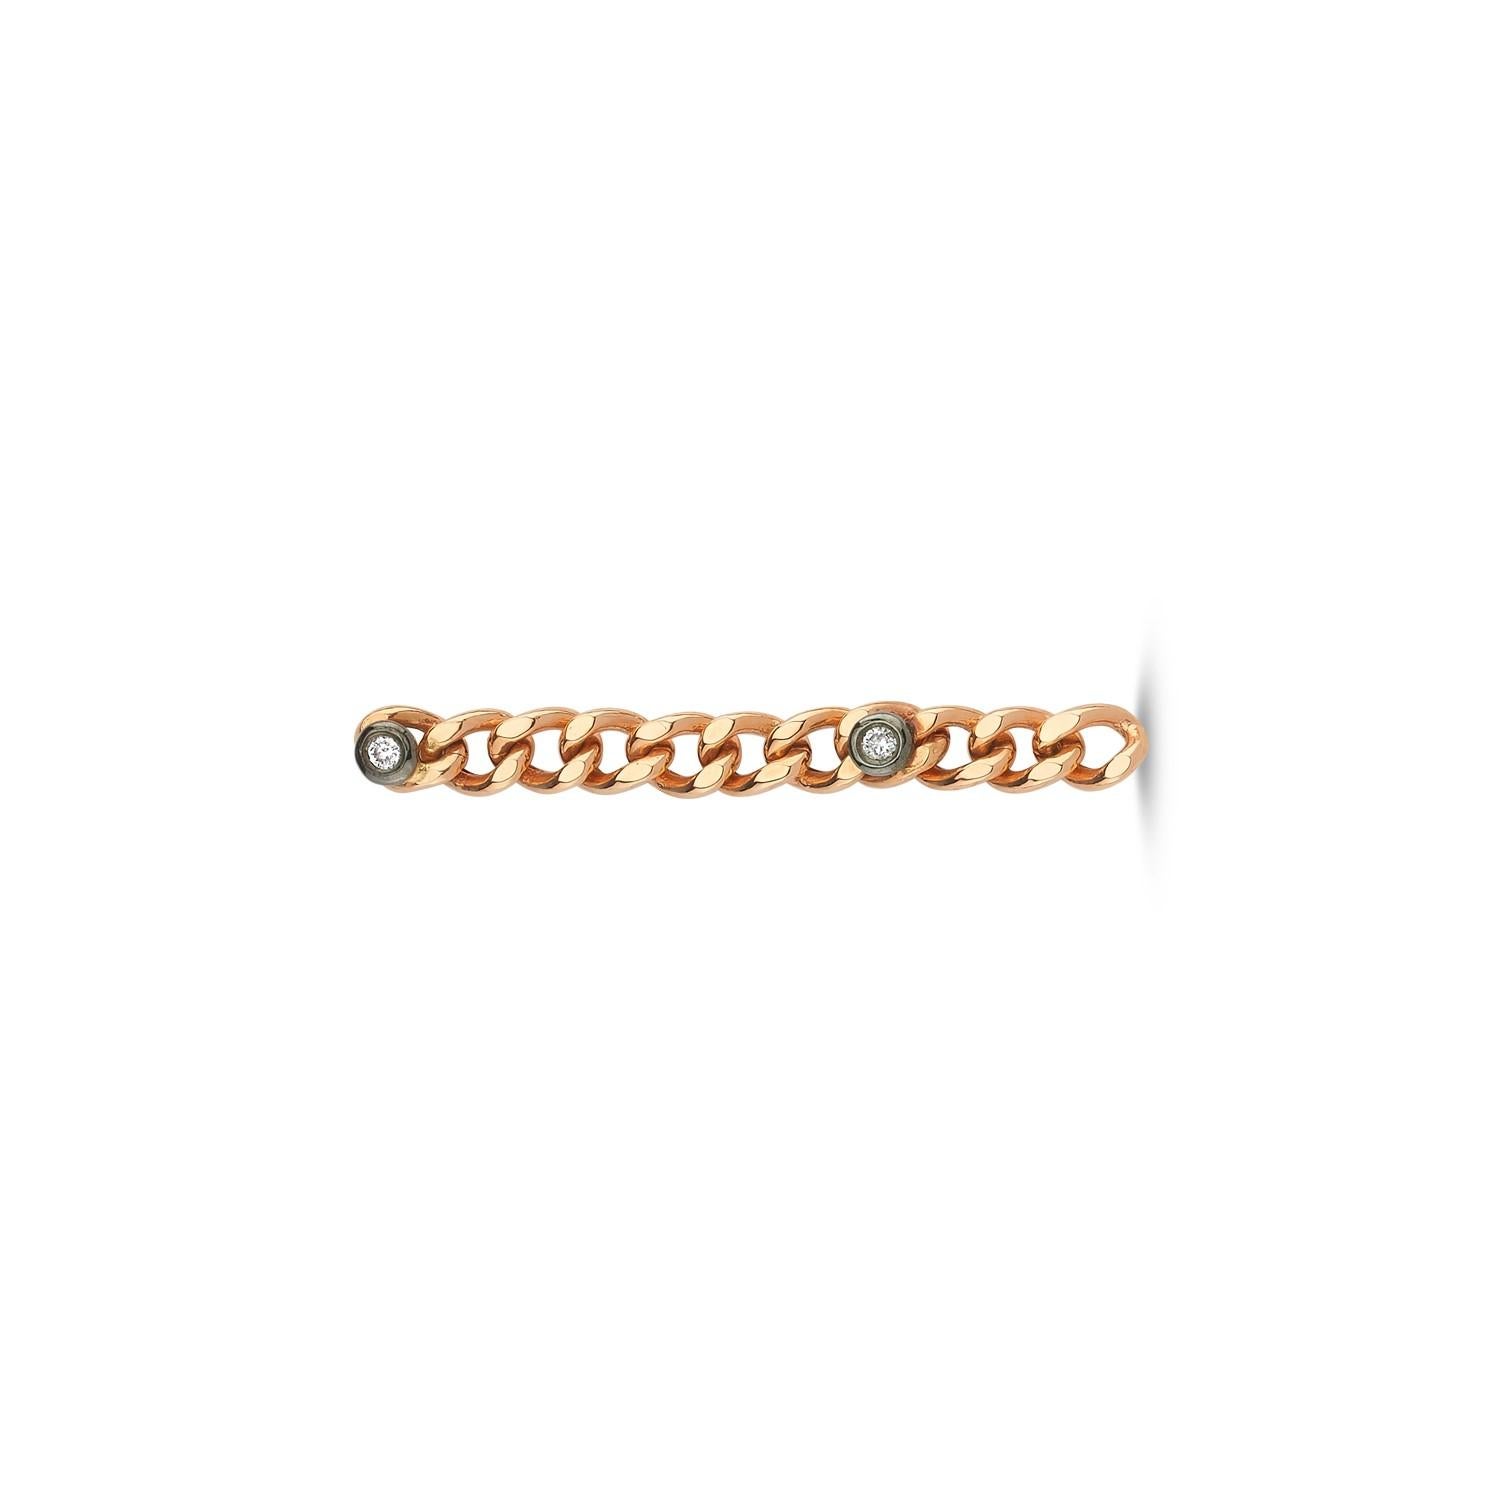 This collection is inspired by the Mediterranean sea and its eternity. 

2 Diamond retro chain earring (single) in 14k rose gold by selda jewellery

Additional Information:-
Collection: Waves collection
14K Rose gold
0.09ct White diamond
Length 4cm